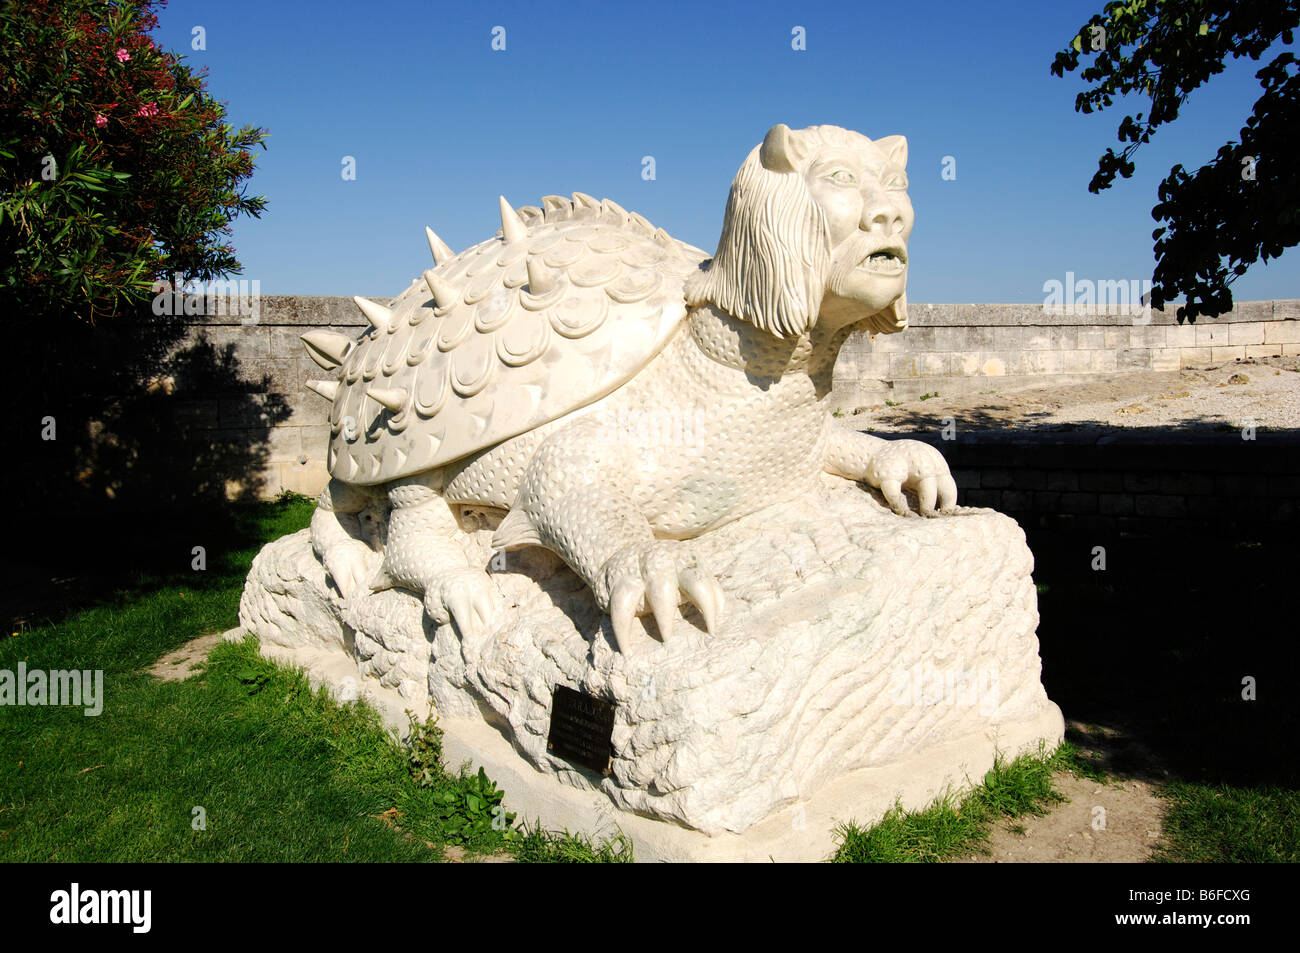 La Tarasque, turtle made of marble with the face of King Rene, Tarascon, Provence, France, Europe Stock Photo